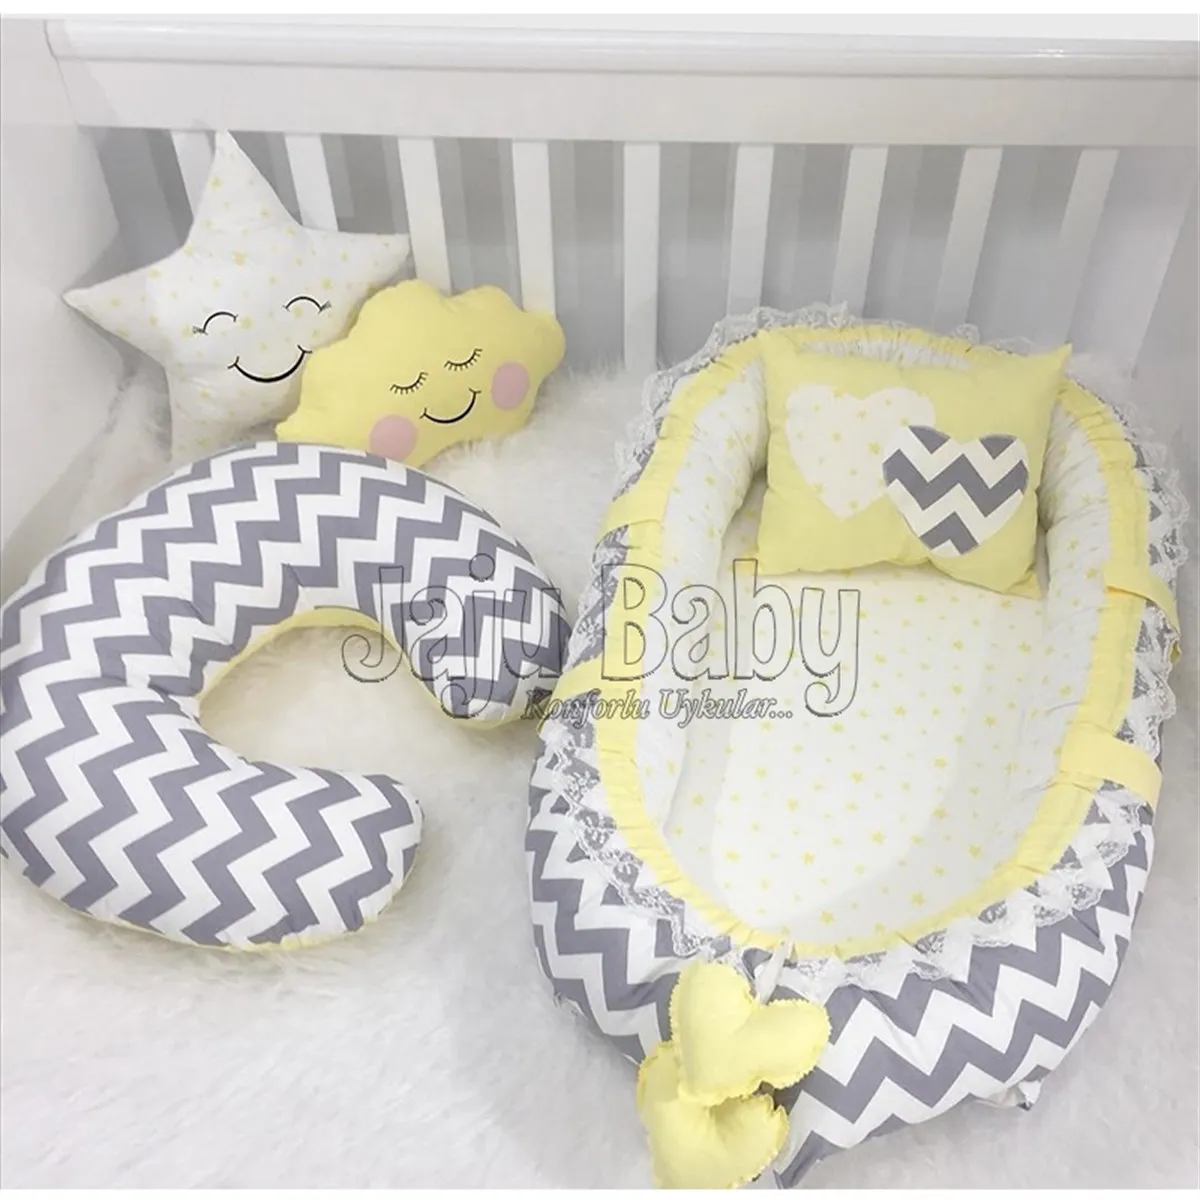 Jaju Baby Handmade, Gray Zigzag and Yellow Design Babynest and Breastfeeding Pillow 5 Pieces Set Mother Side Portable Baby Bed